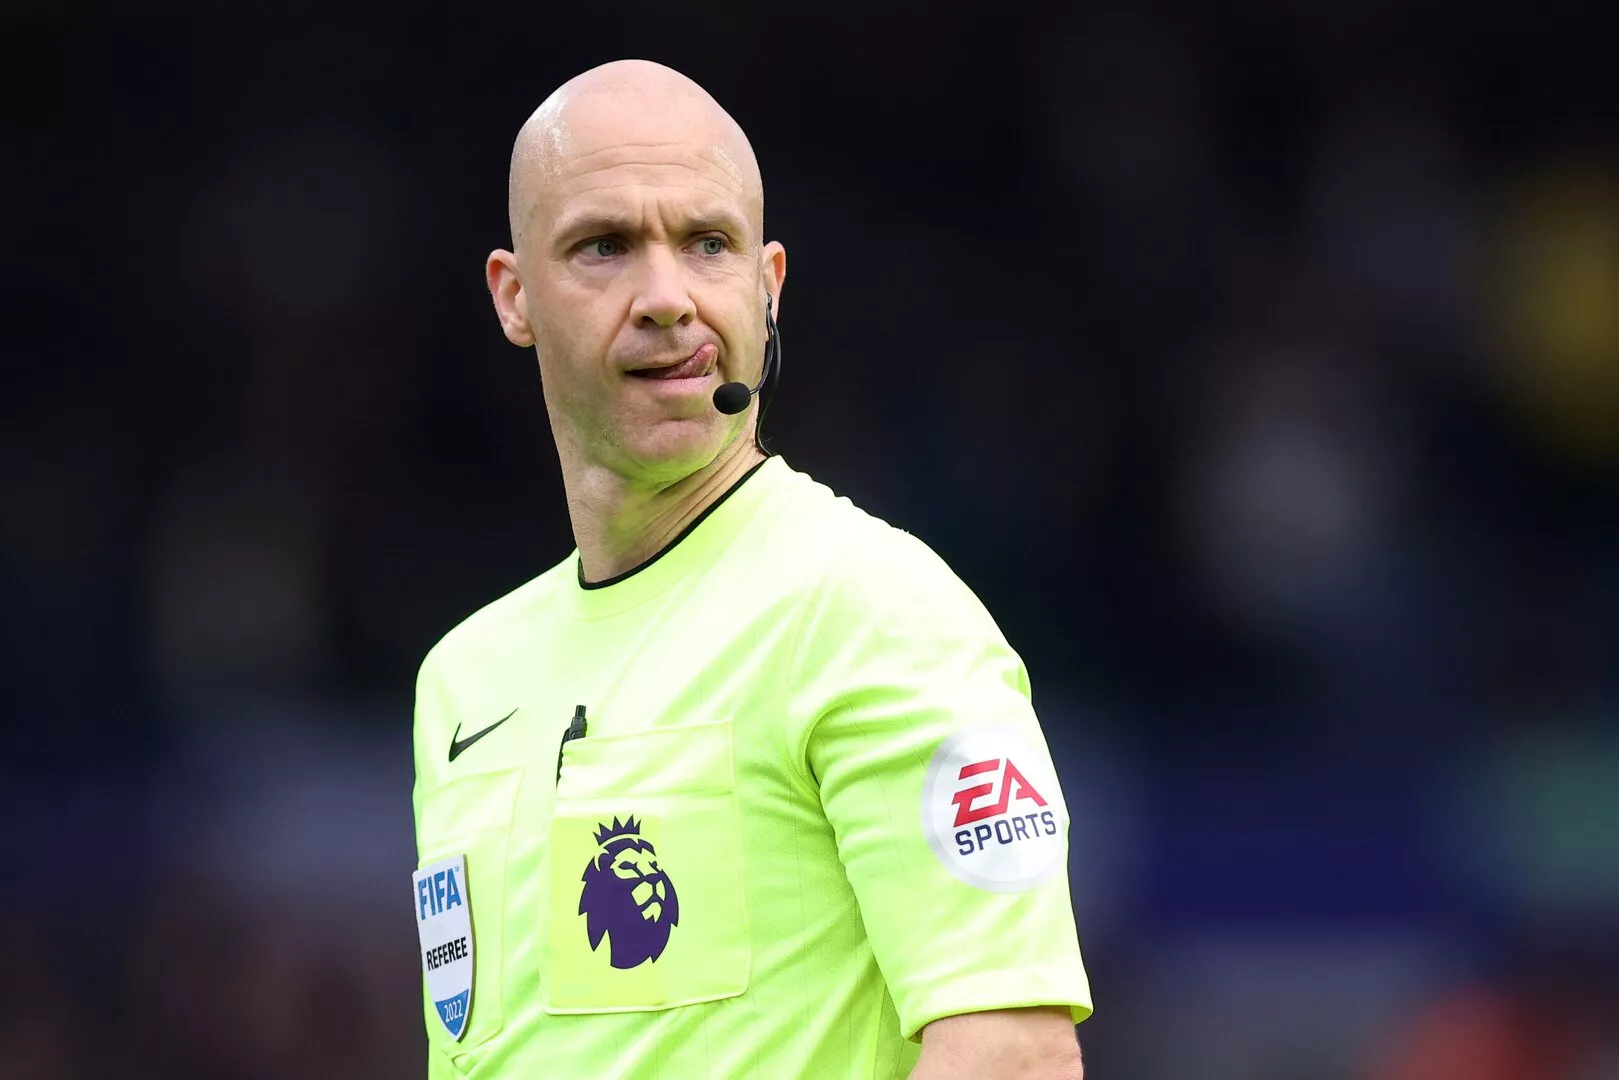 12 recently-retired stars fast-tracked to become Premier League referees after recent controversies